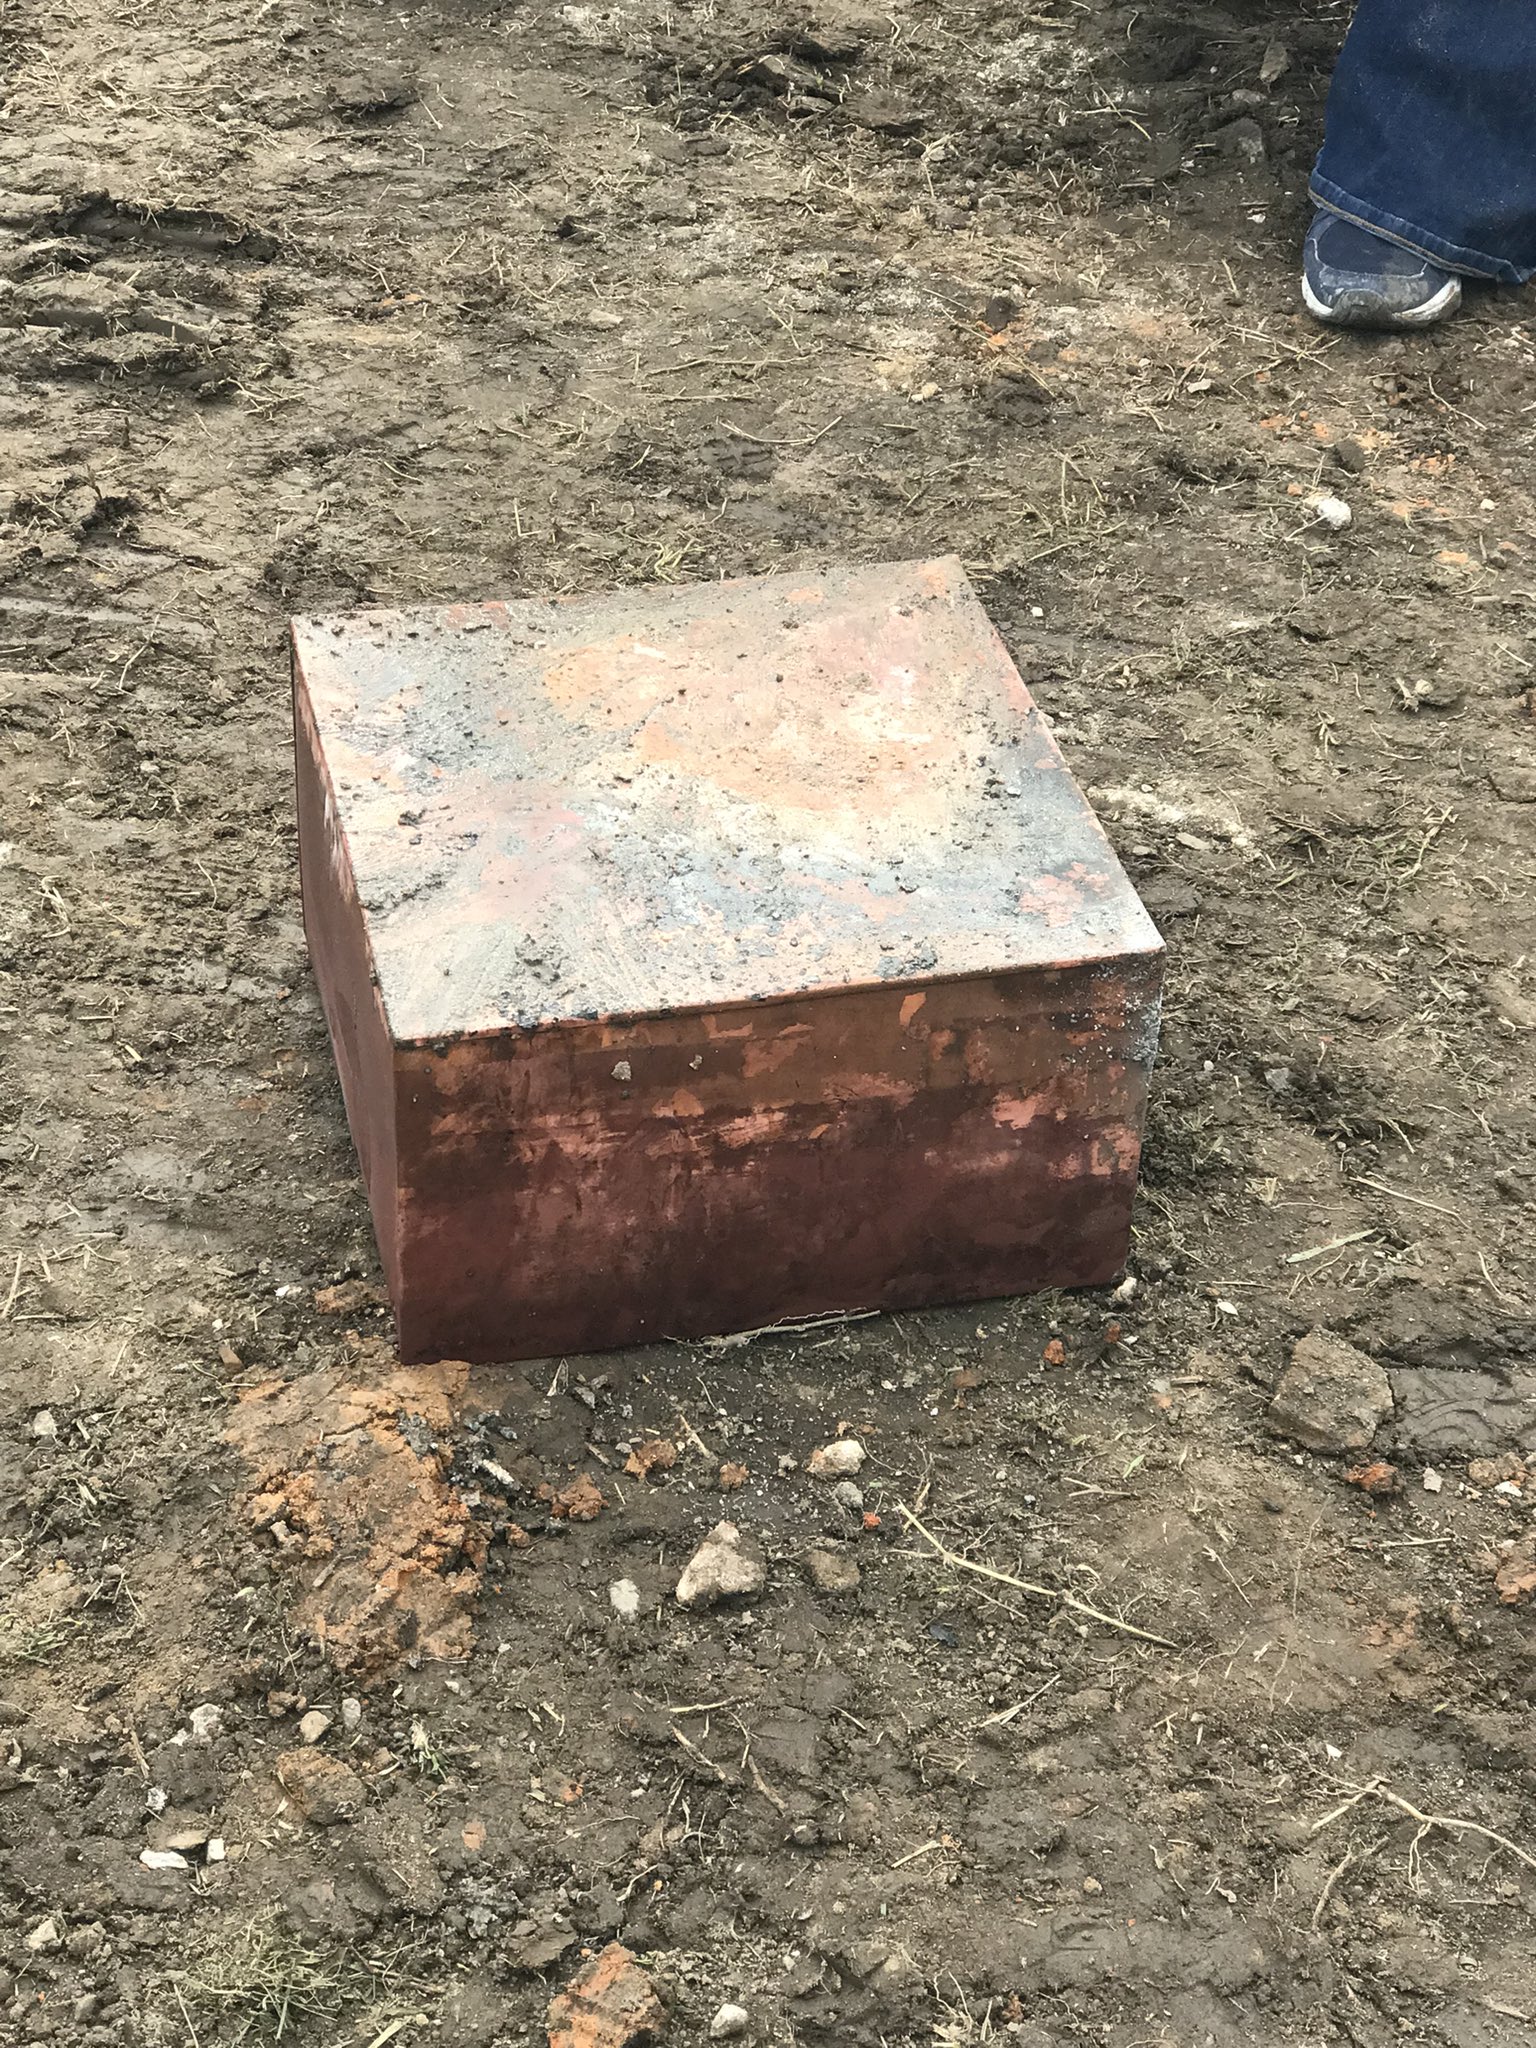 130-year-old time capsule found in base of US statue